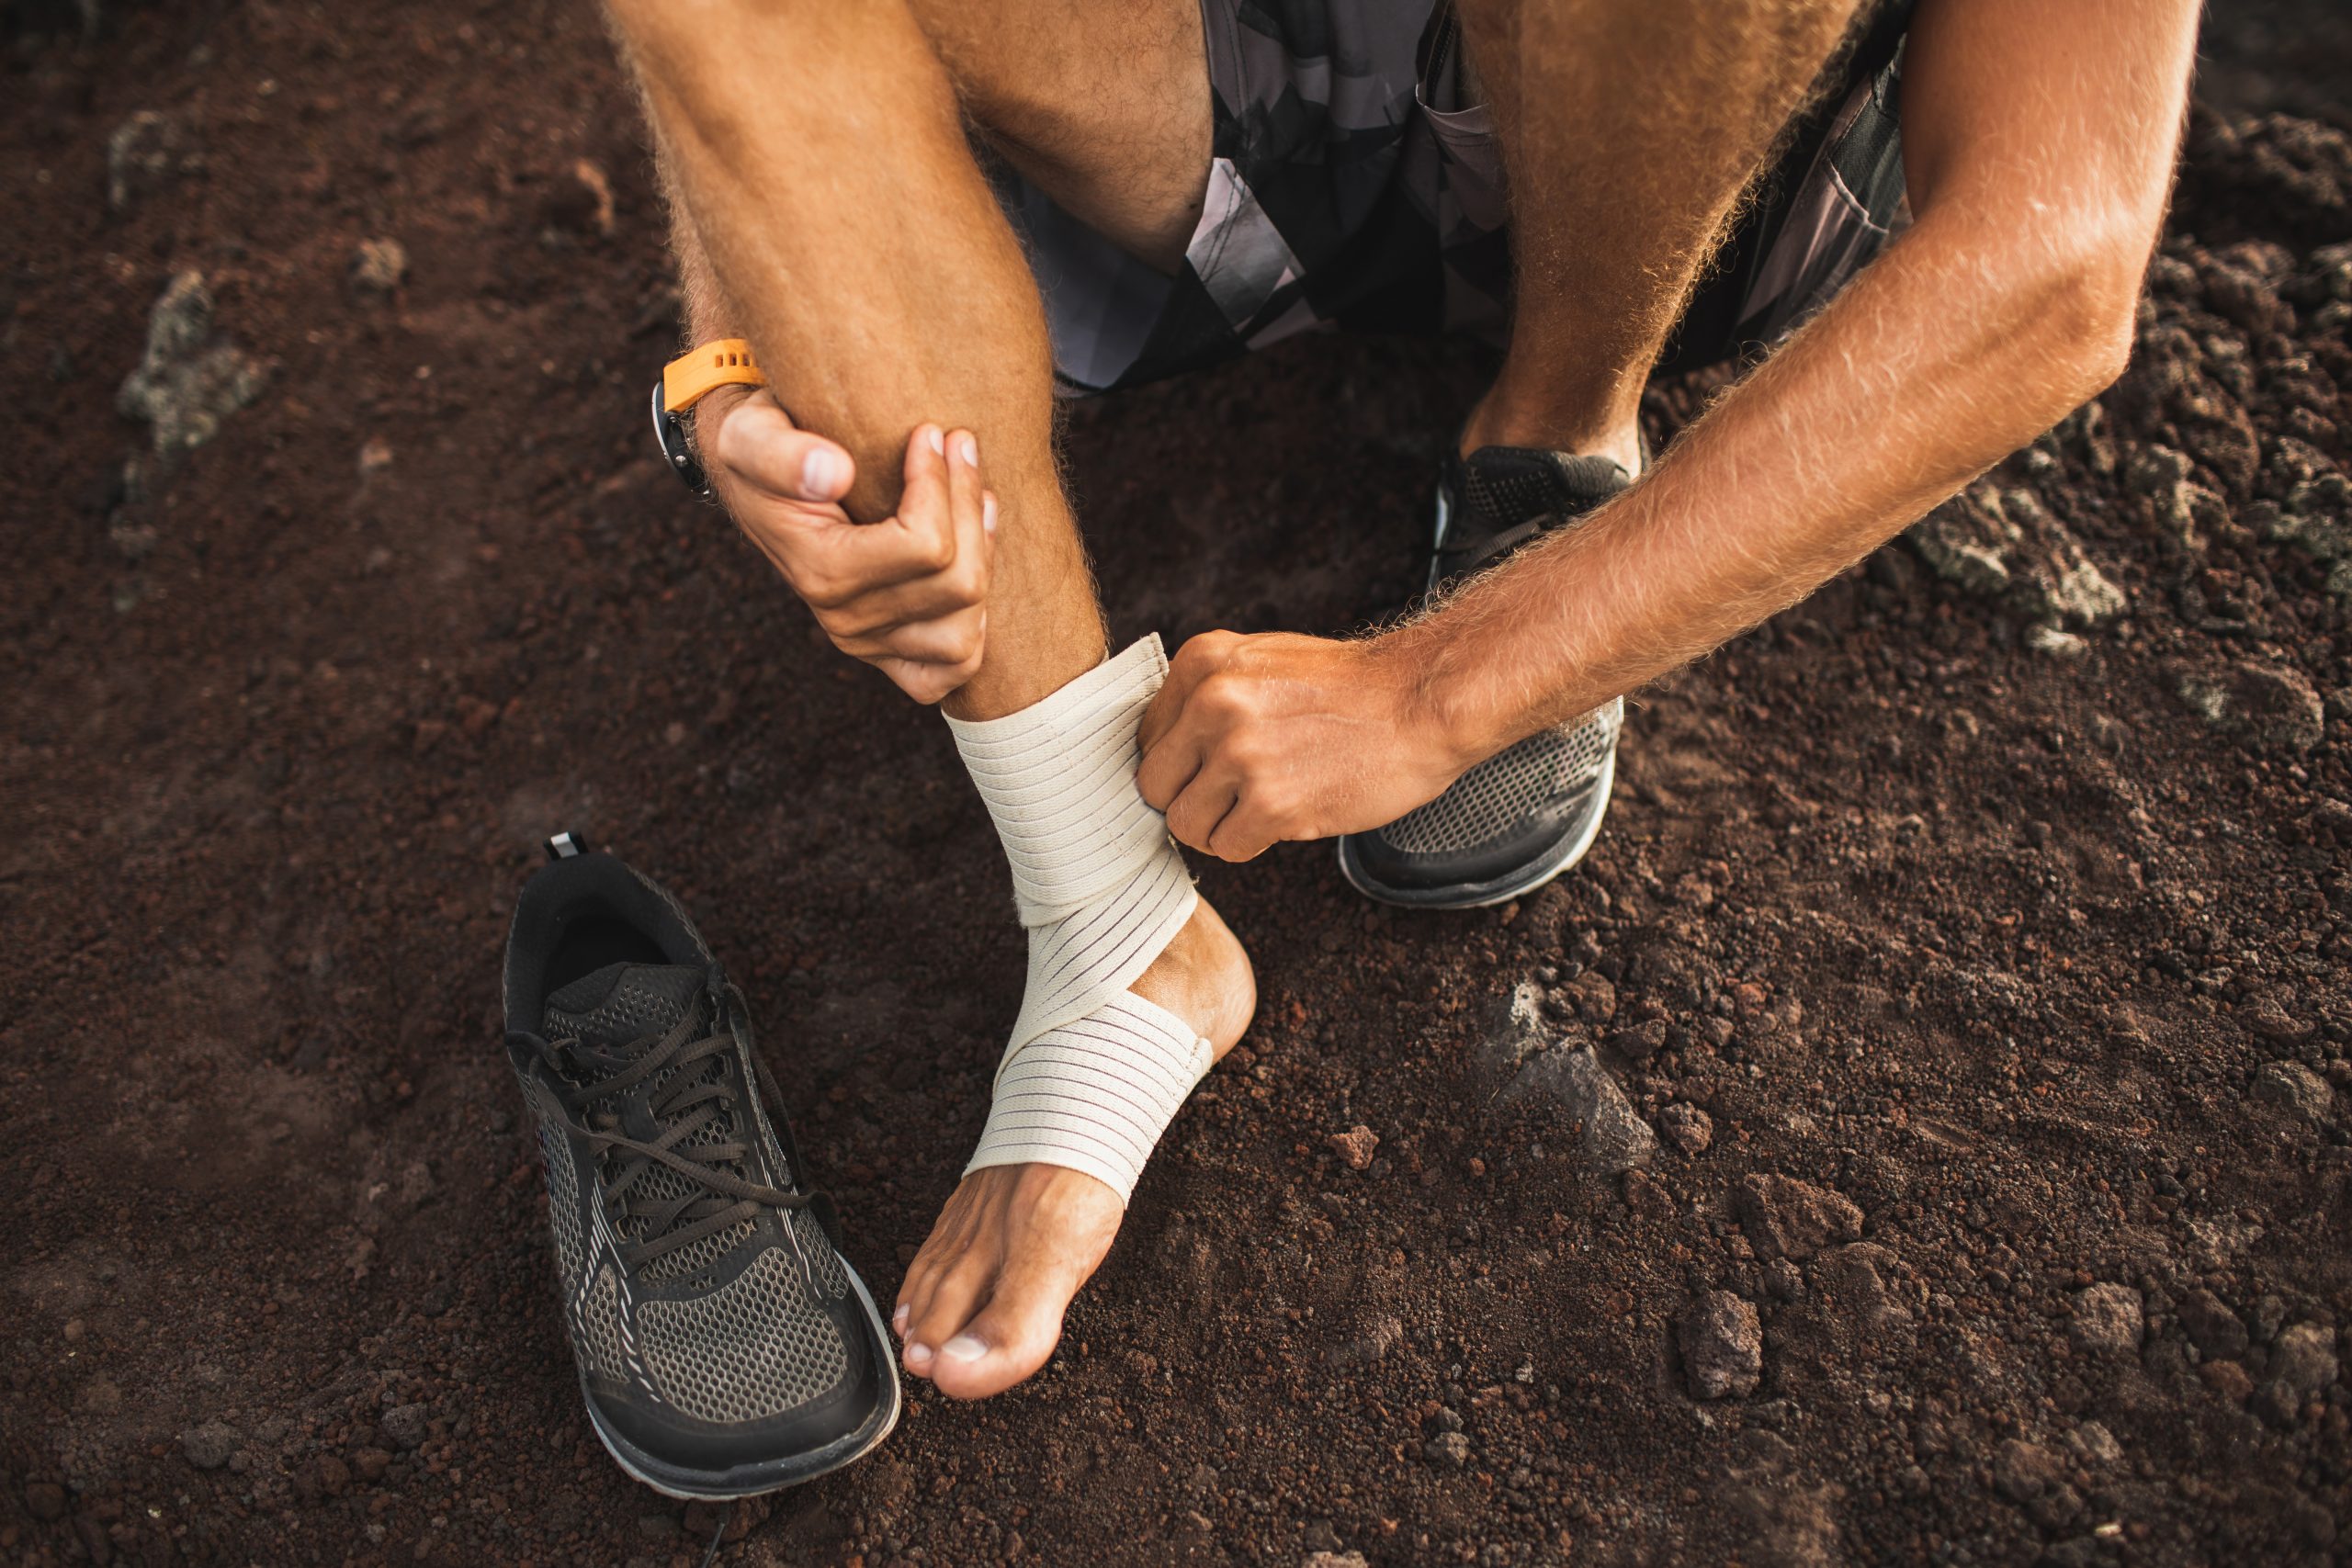 Injured athlete man wearing sneakers and wrapping a compression band to treat Achilles tendonitis.